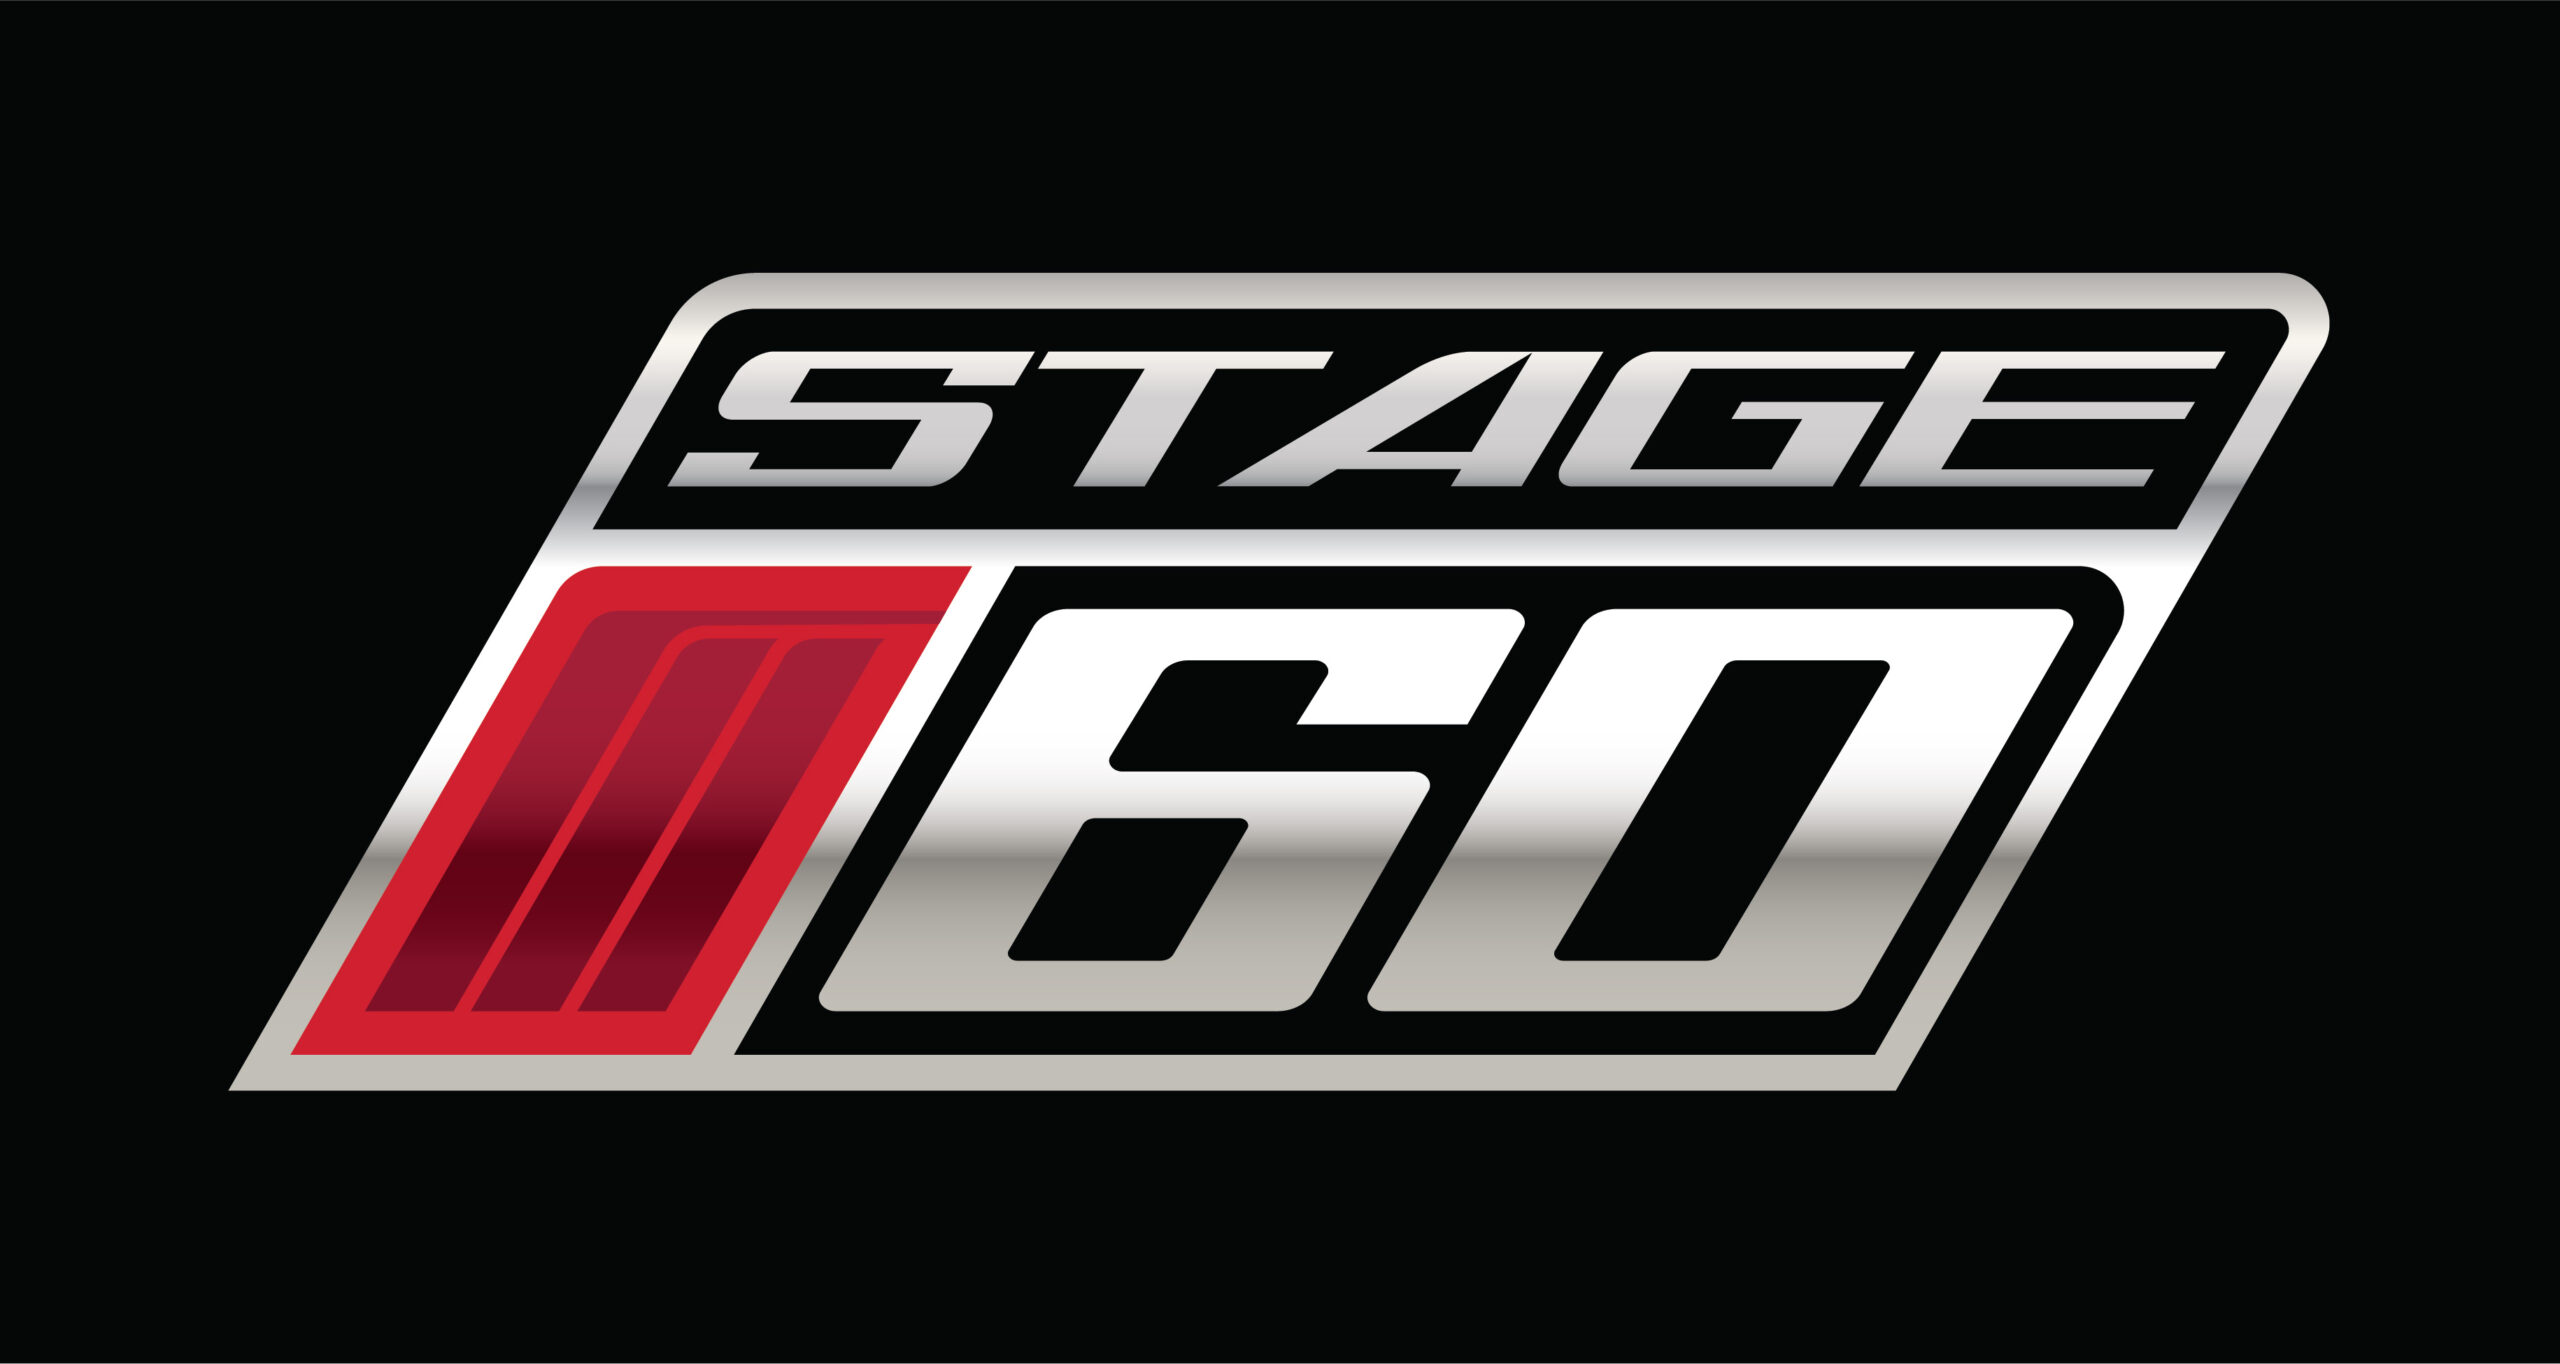 Stage 60